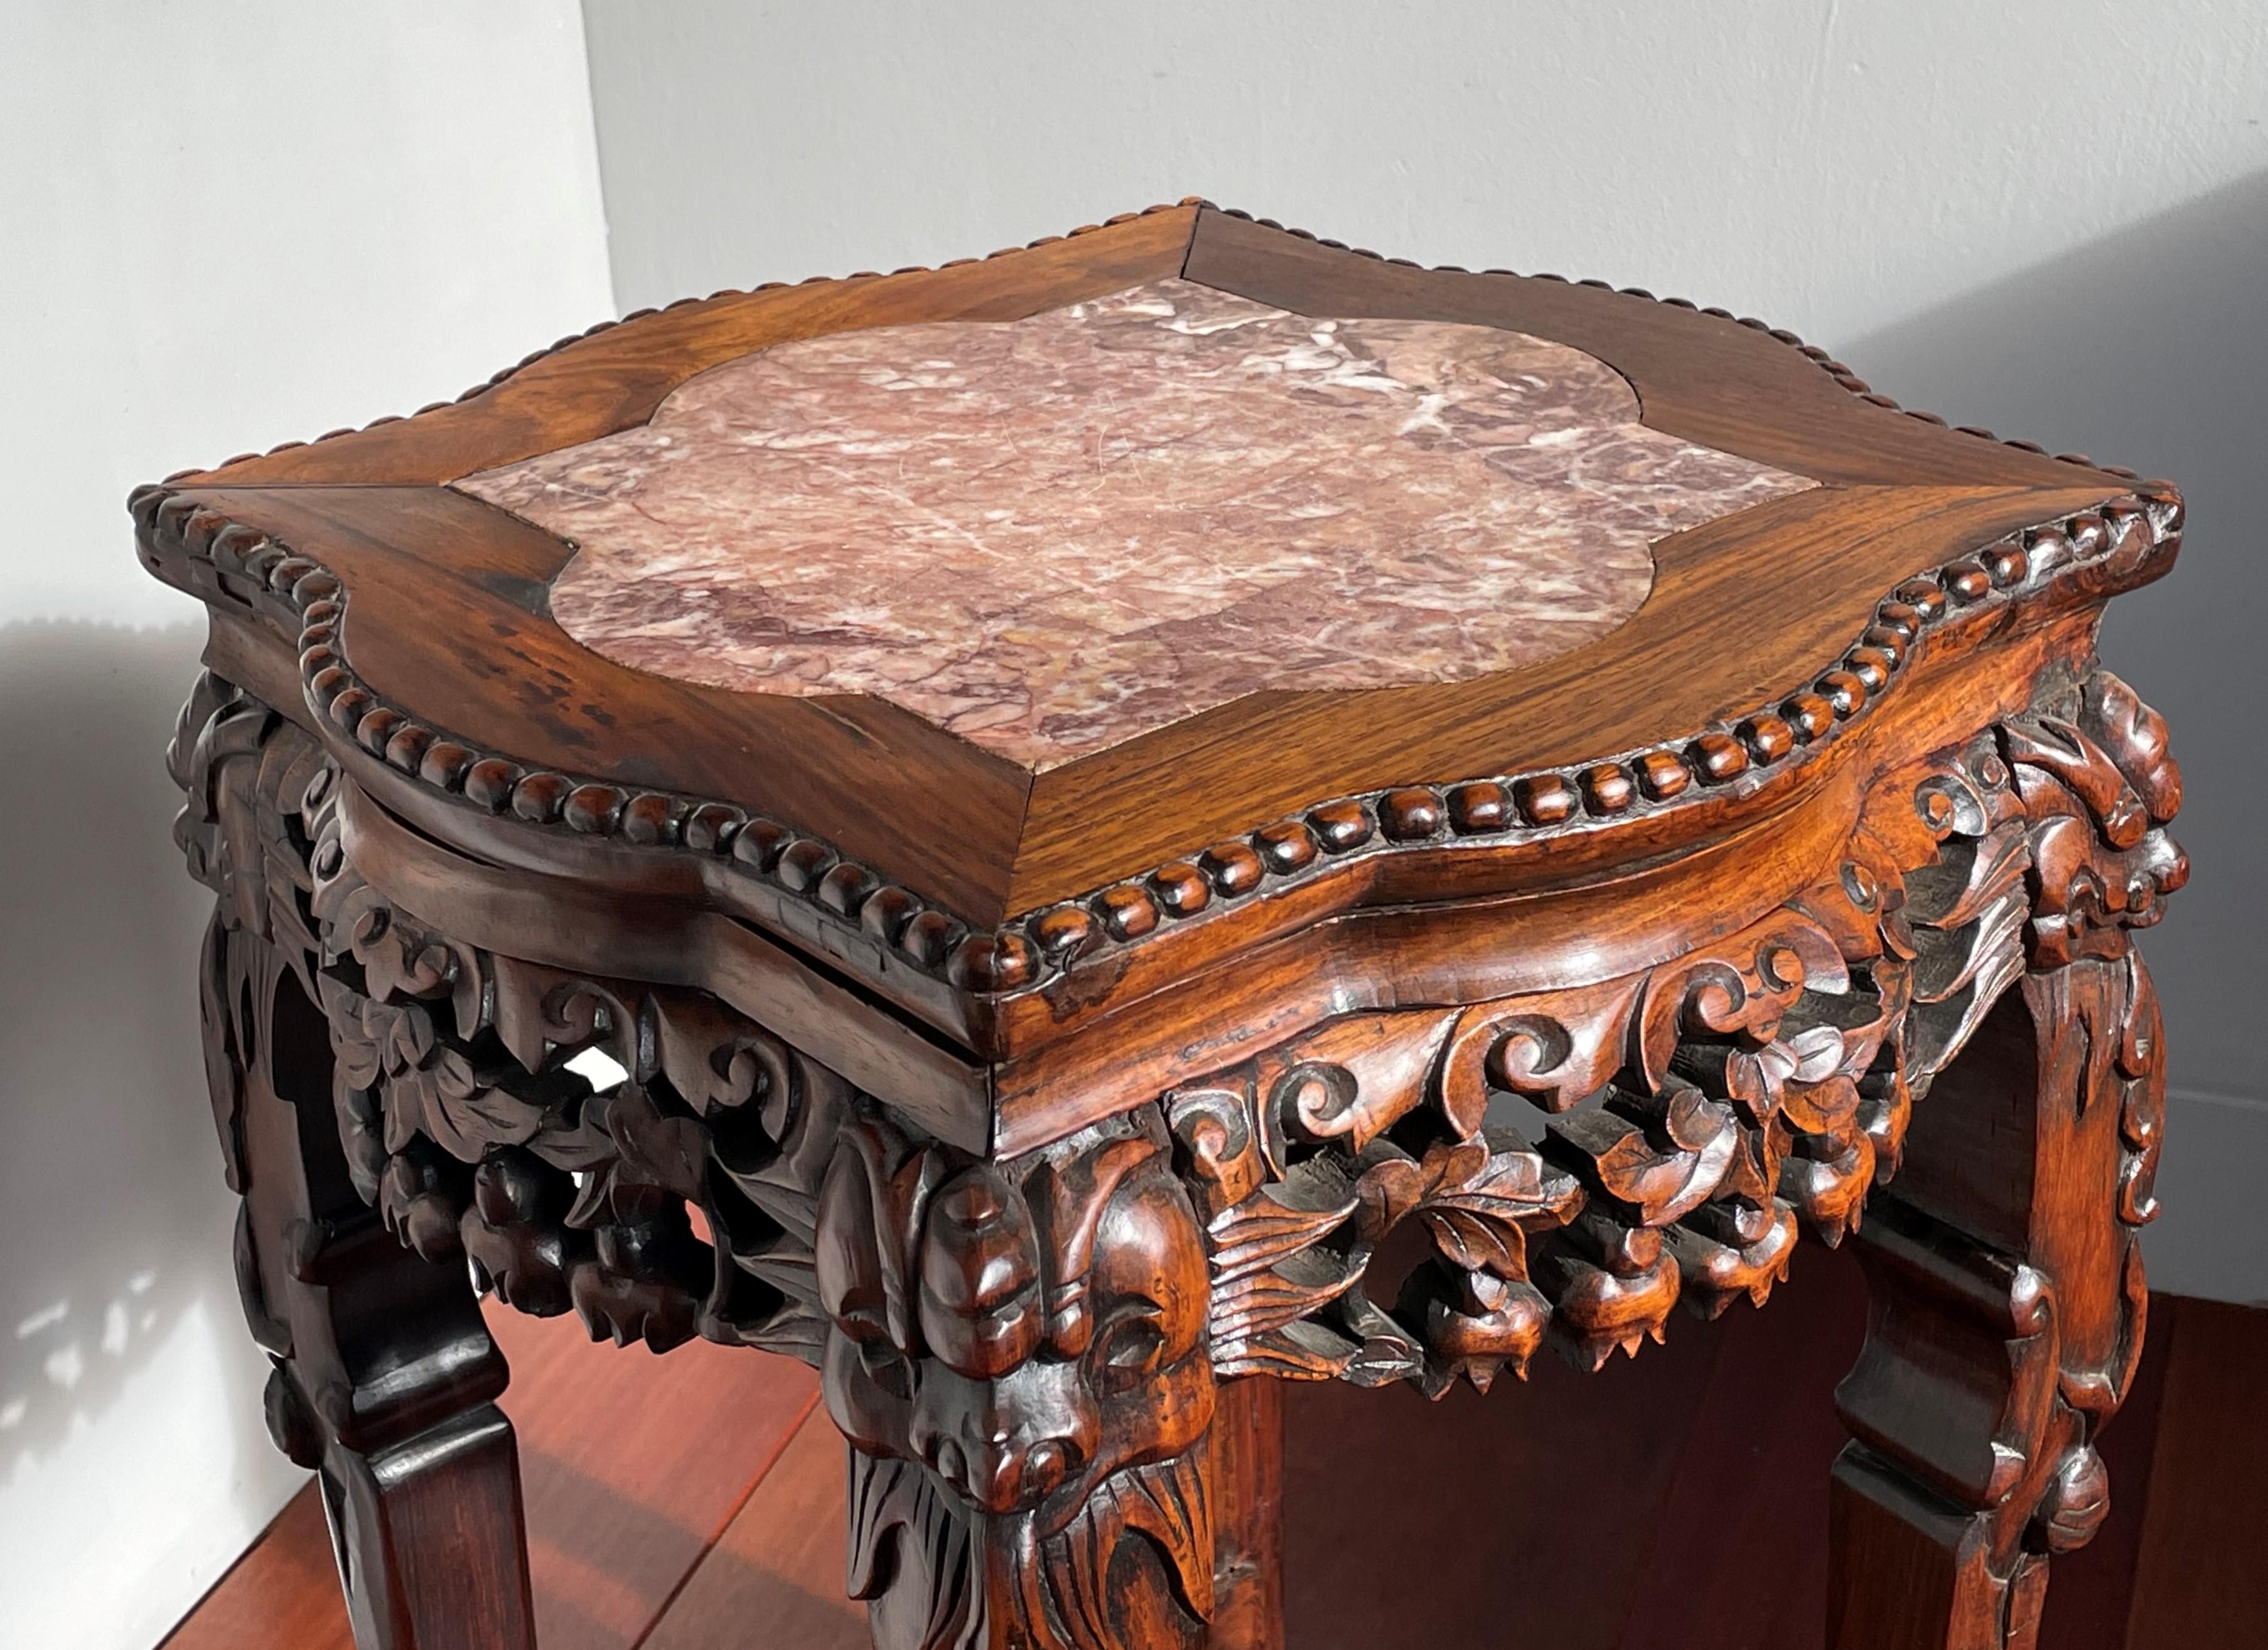 Perfect size, 19th century Chinese stand, marked with calligraphy signature underneath.

This entirely handcrafted, Chinese table from circa 1880-1890 is as strong and stable as the day it was made and it has the most beautiful patina. Unfortunately